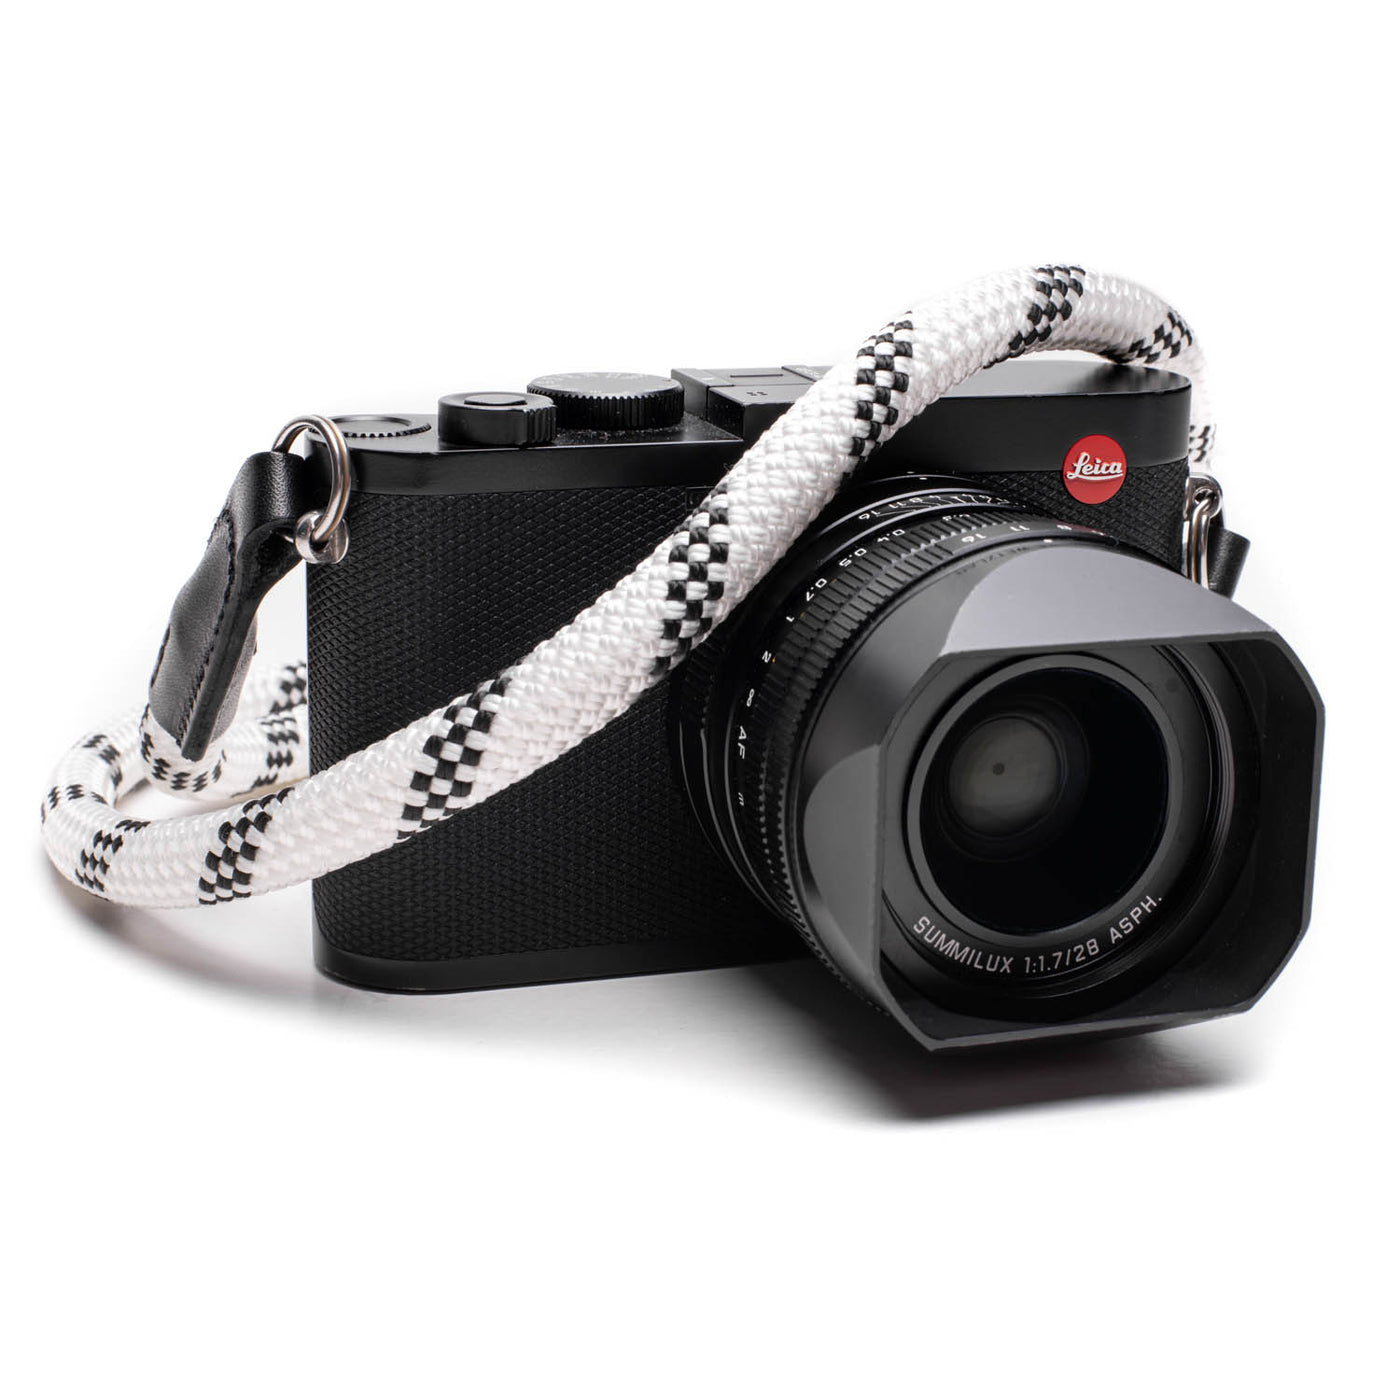 Black Leica camera with a white rope strap 